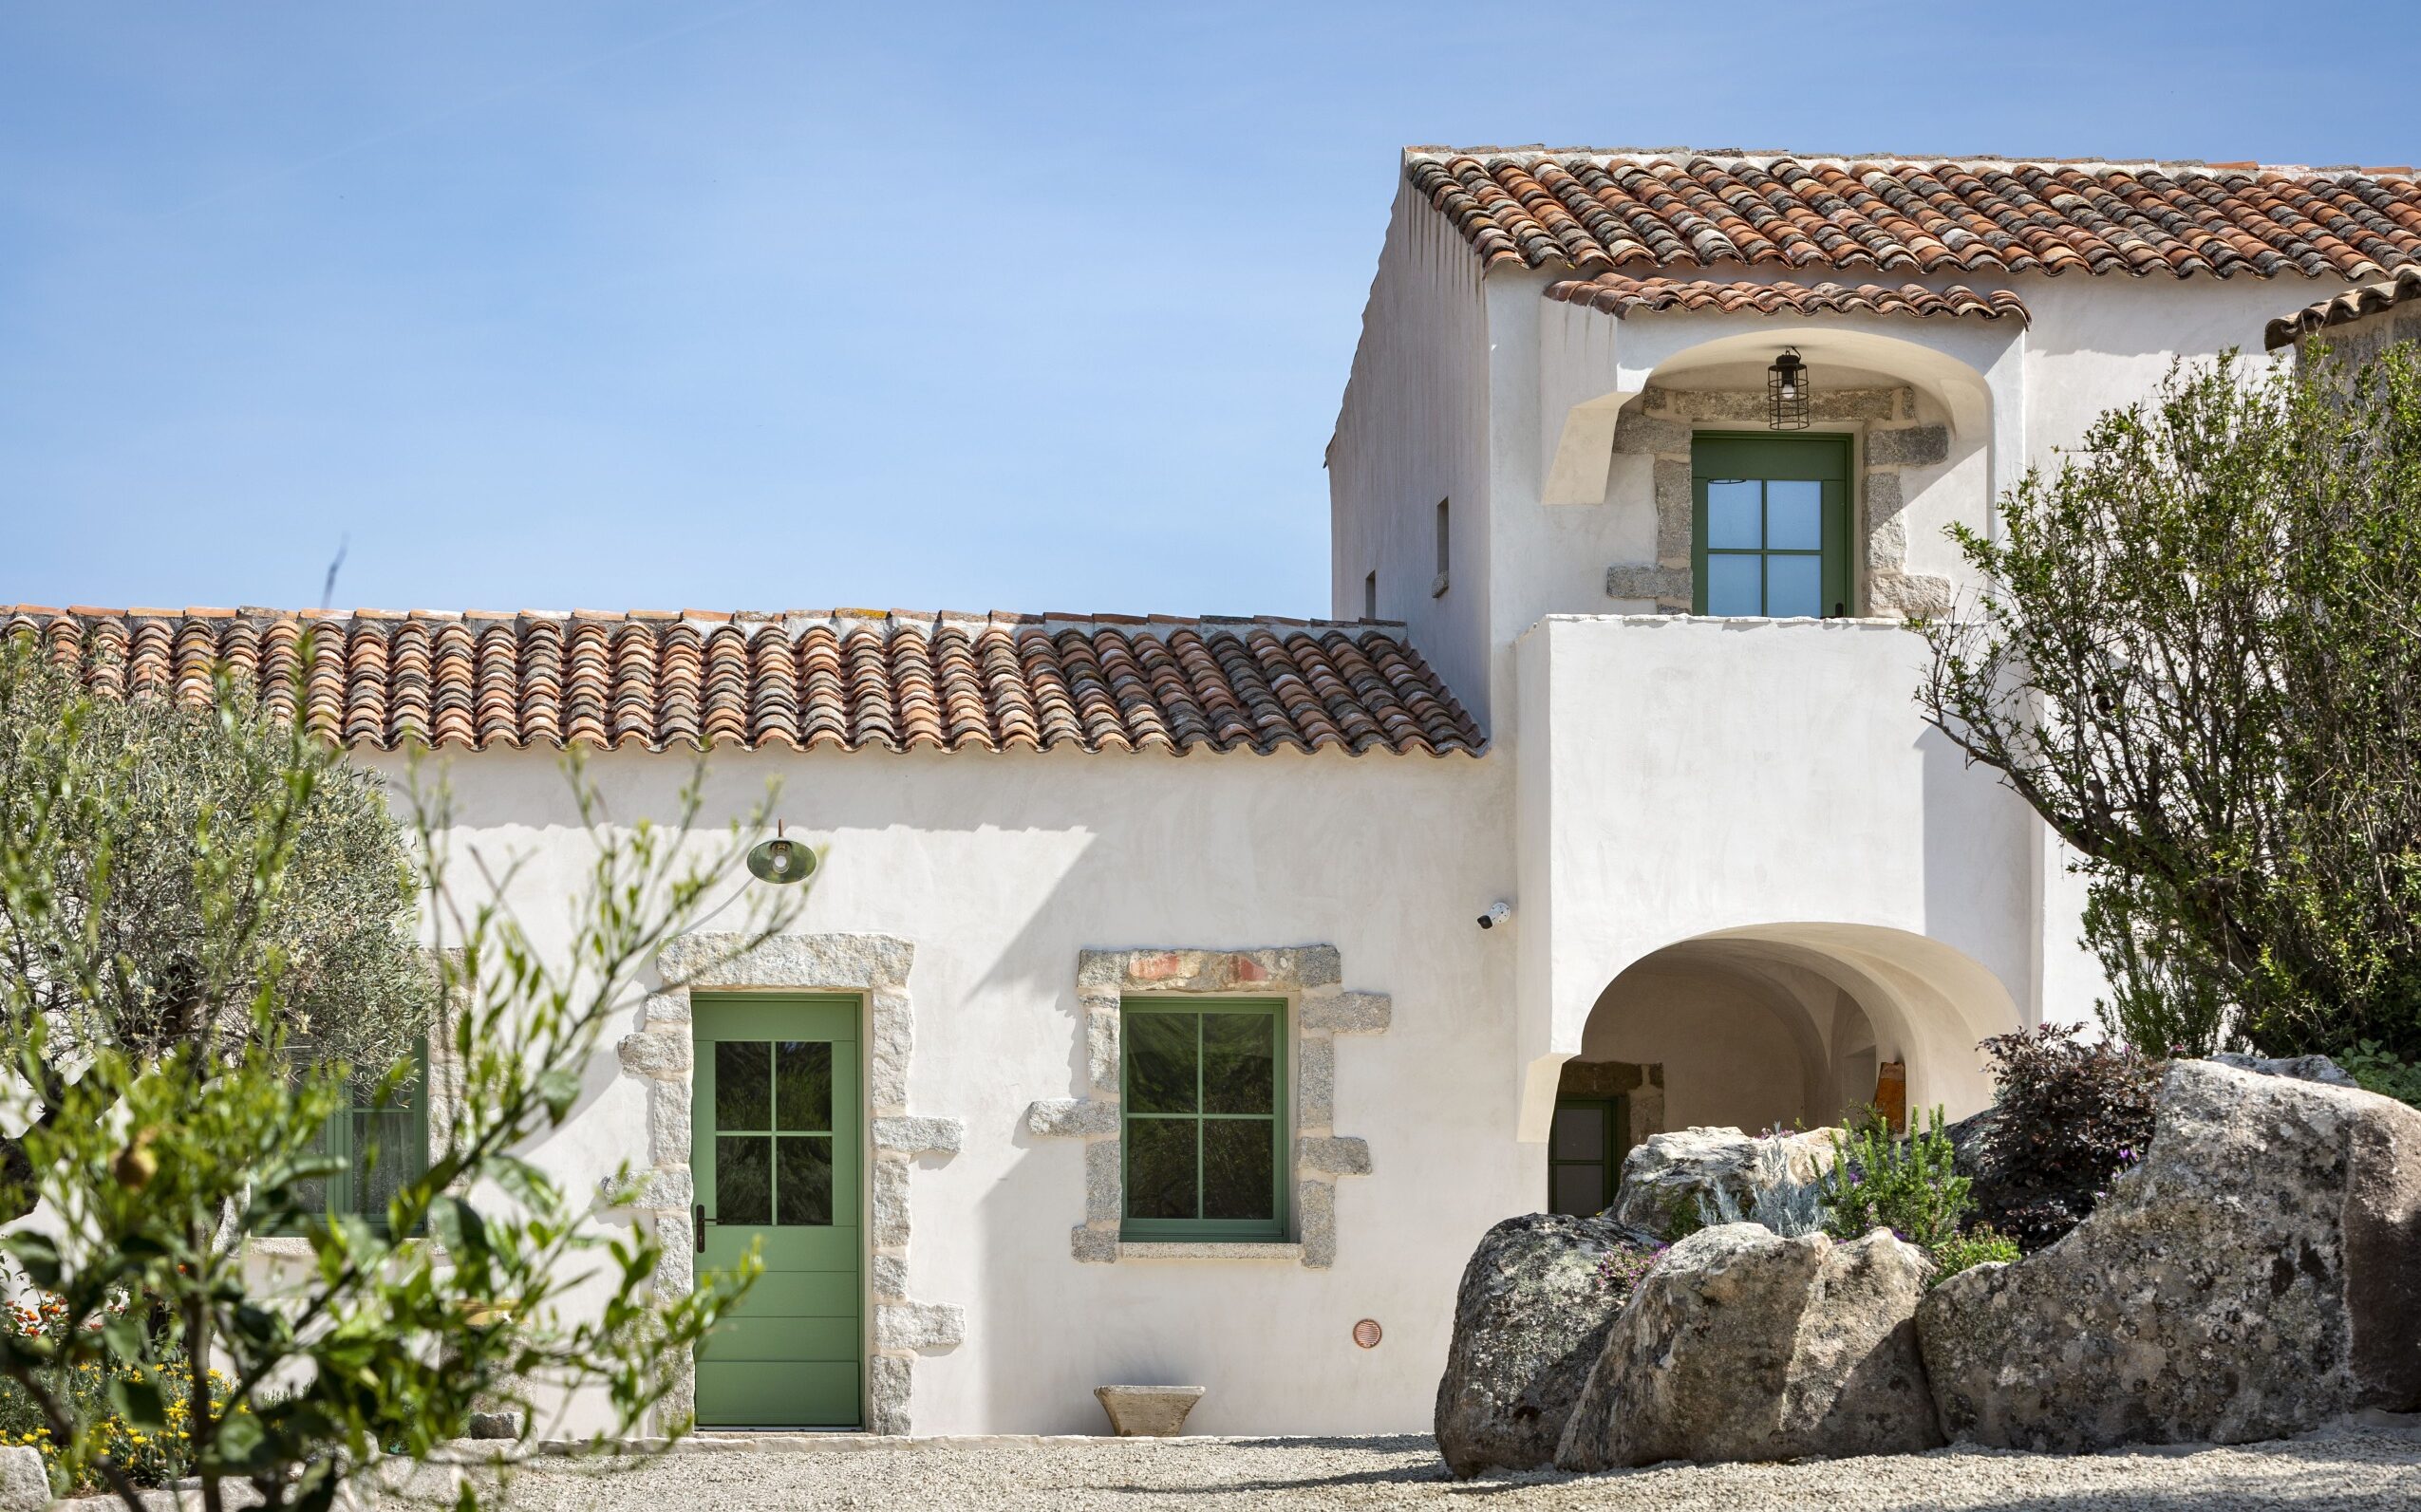 A Stazzo Retreat Built into Sardinian Ruins Sits a Stone’s Throw from the Costa Smeralda